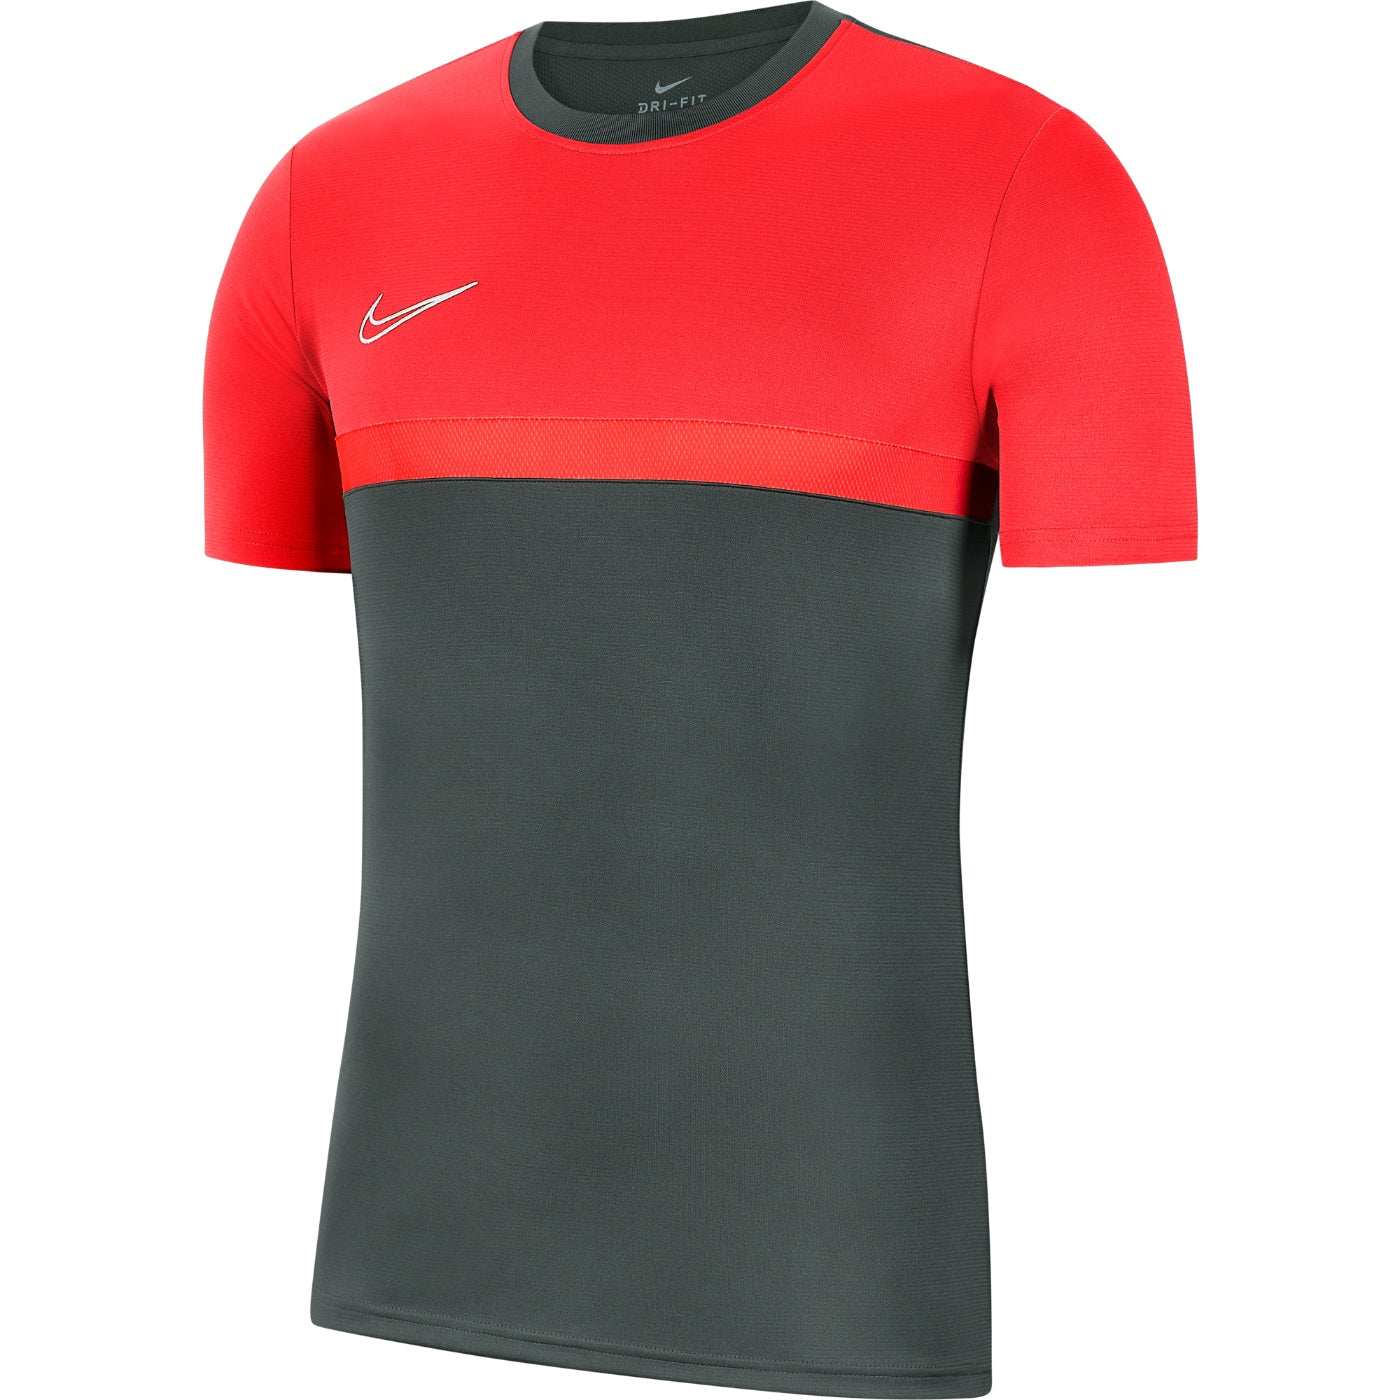 Pack Nike Academy Pro pour Homme. Basket